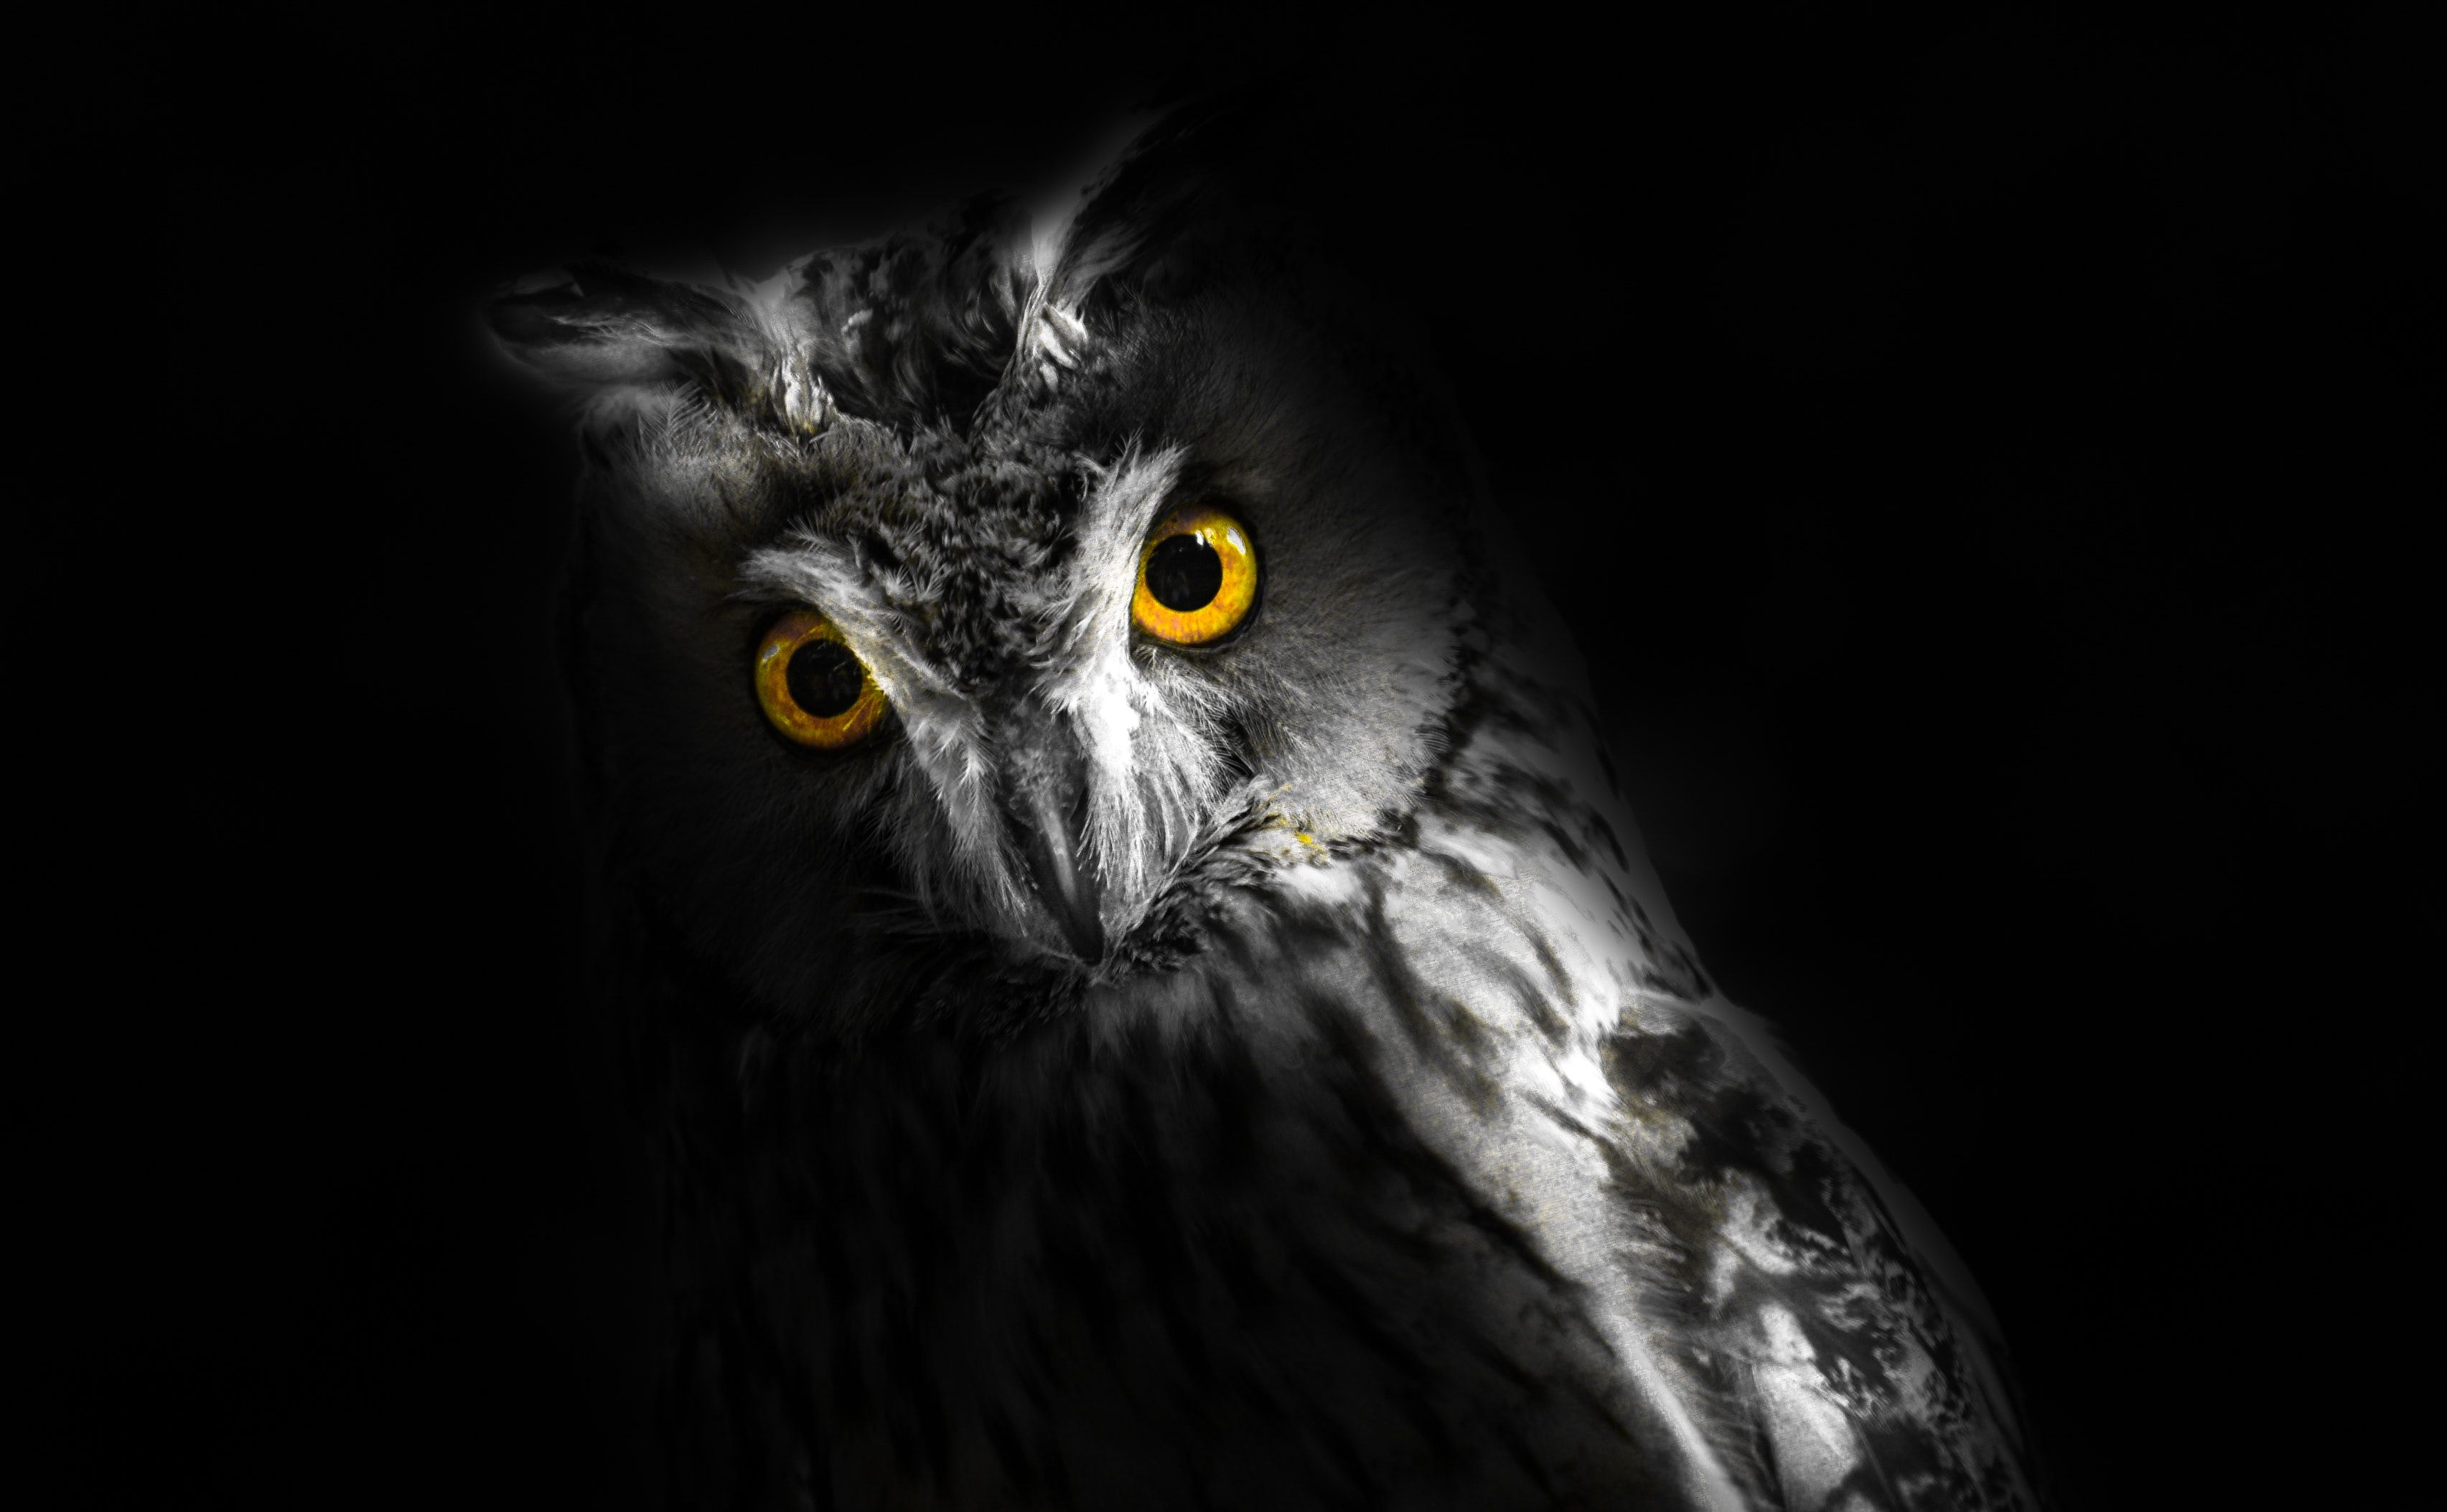 Black Night Forest High Resolution Owl Wallpapers Free Download